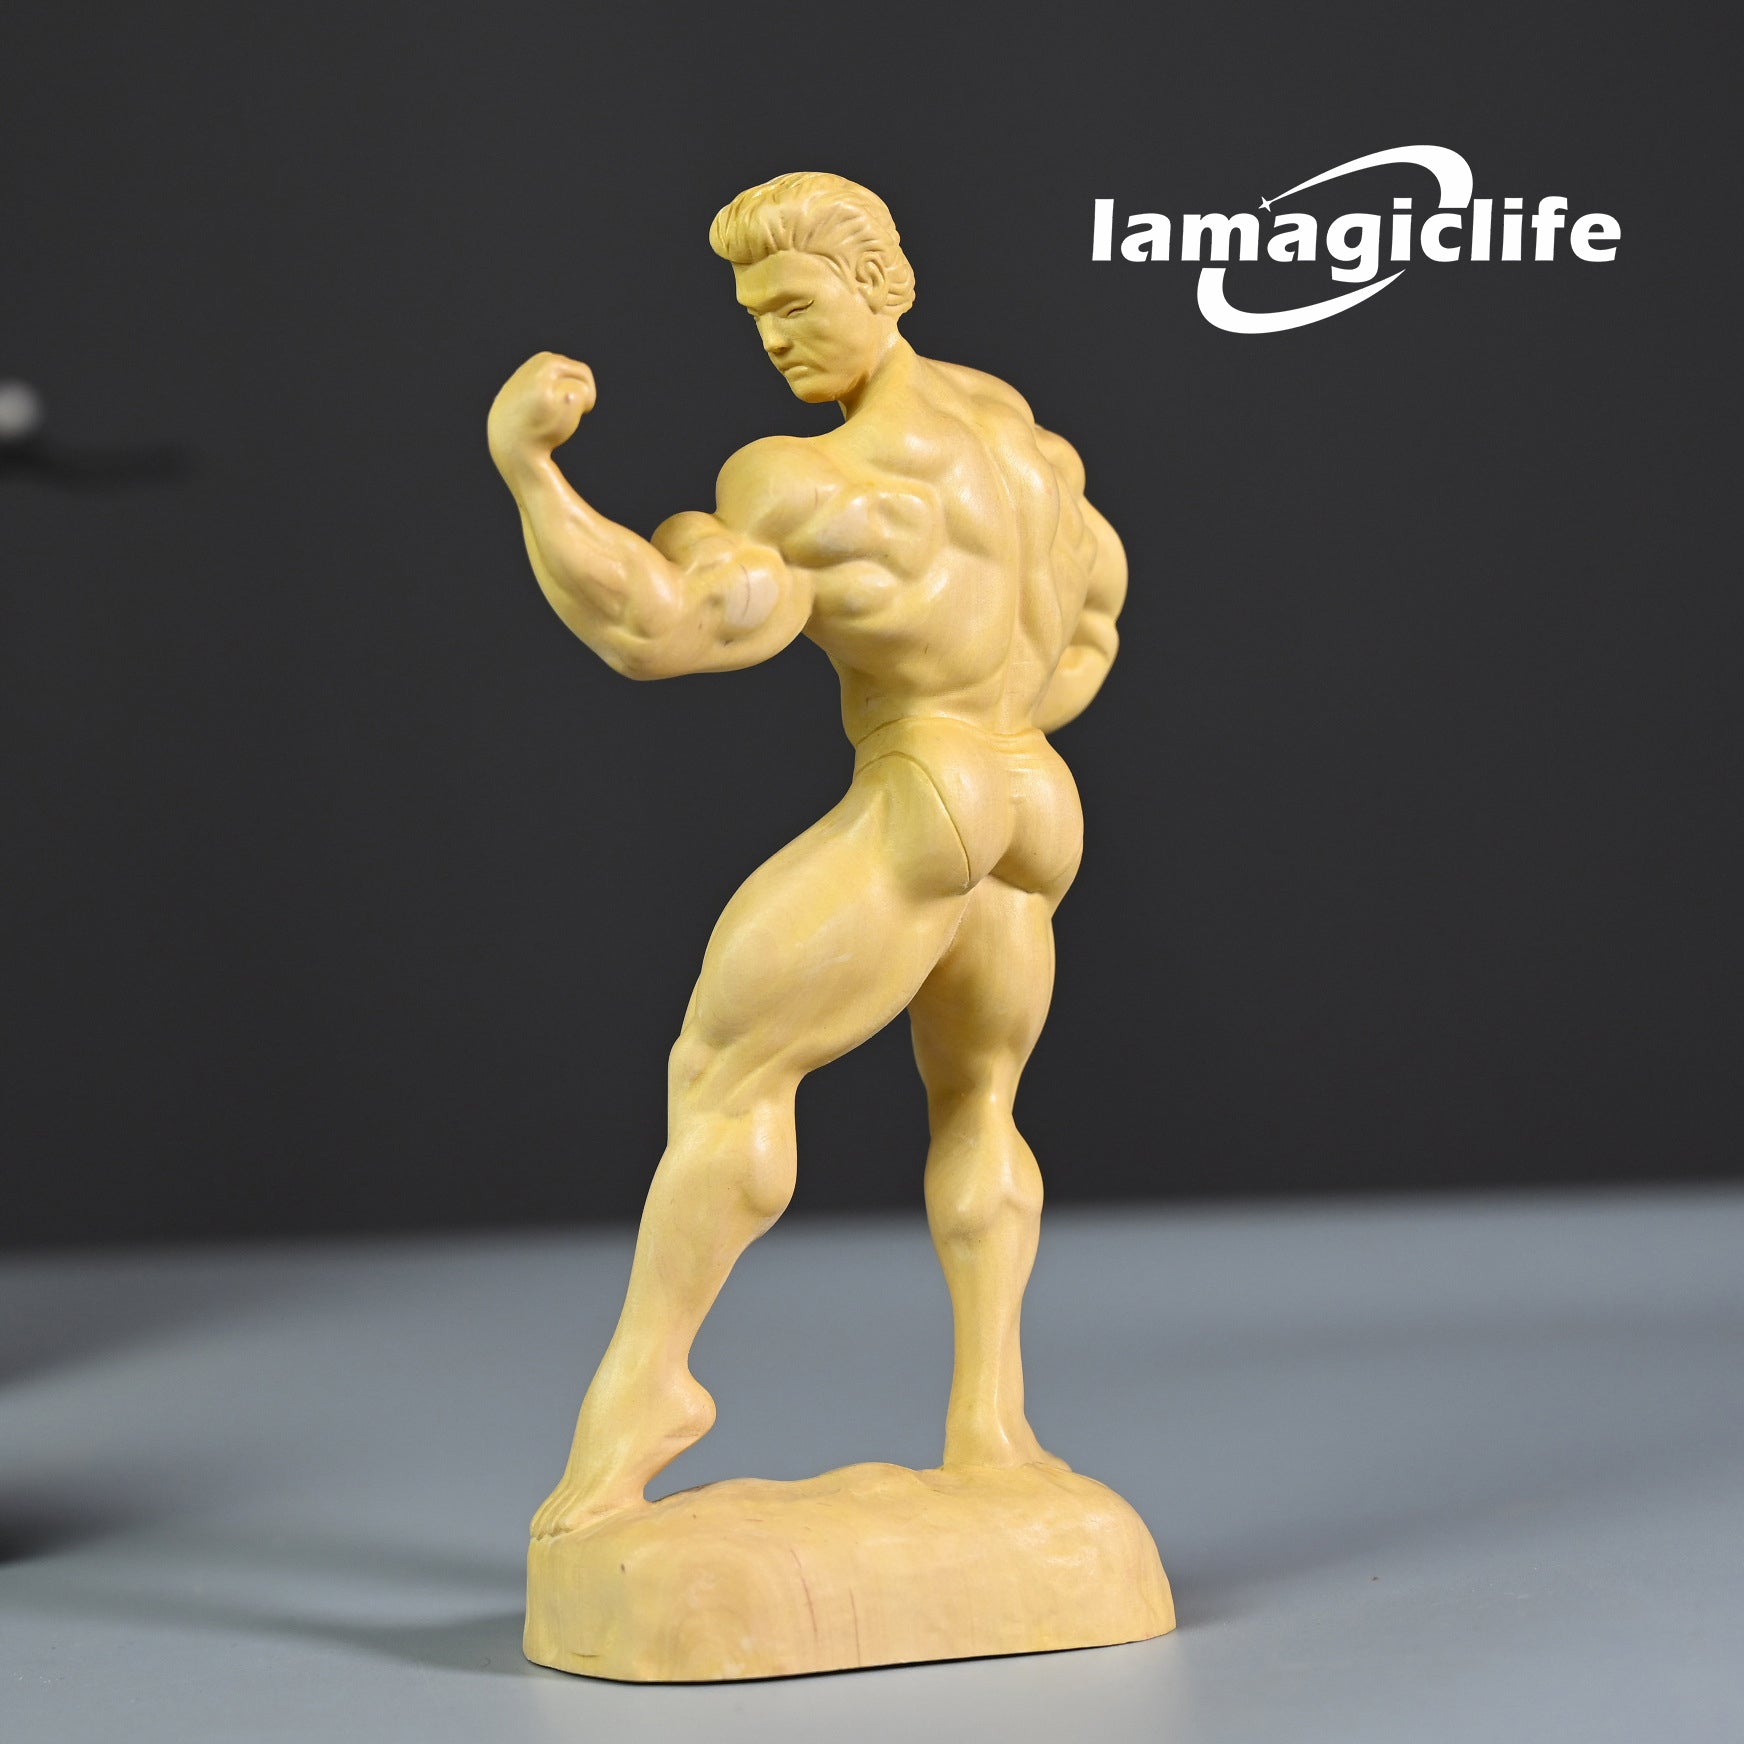 Lamagiclife Artisan Crafted Muscular Gentleman Sculpture in Pure Handcrafted Yellow Boxwood